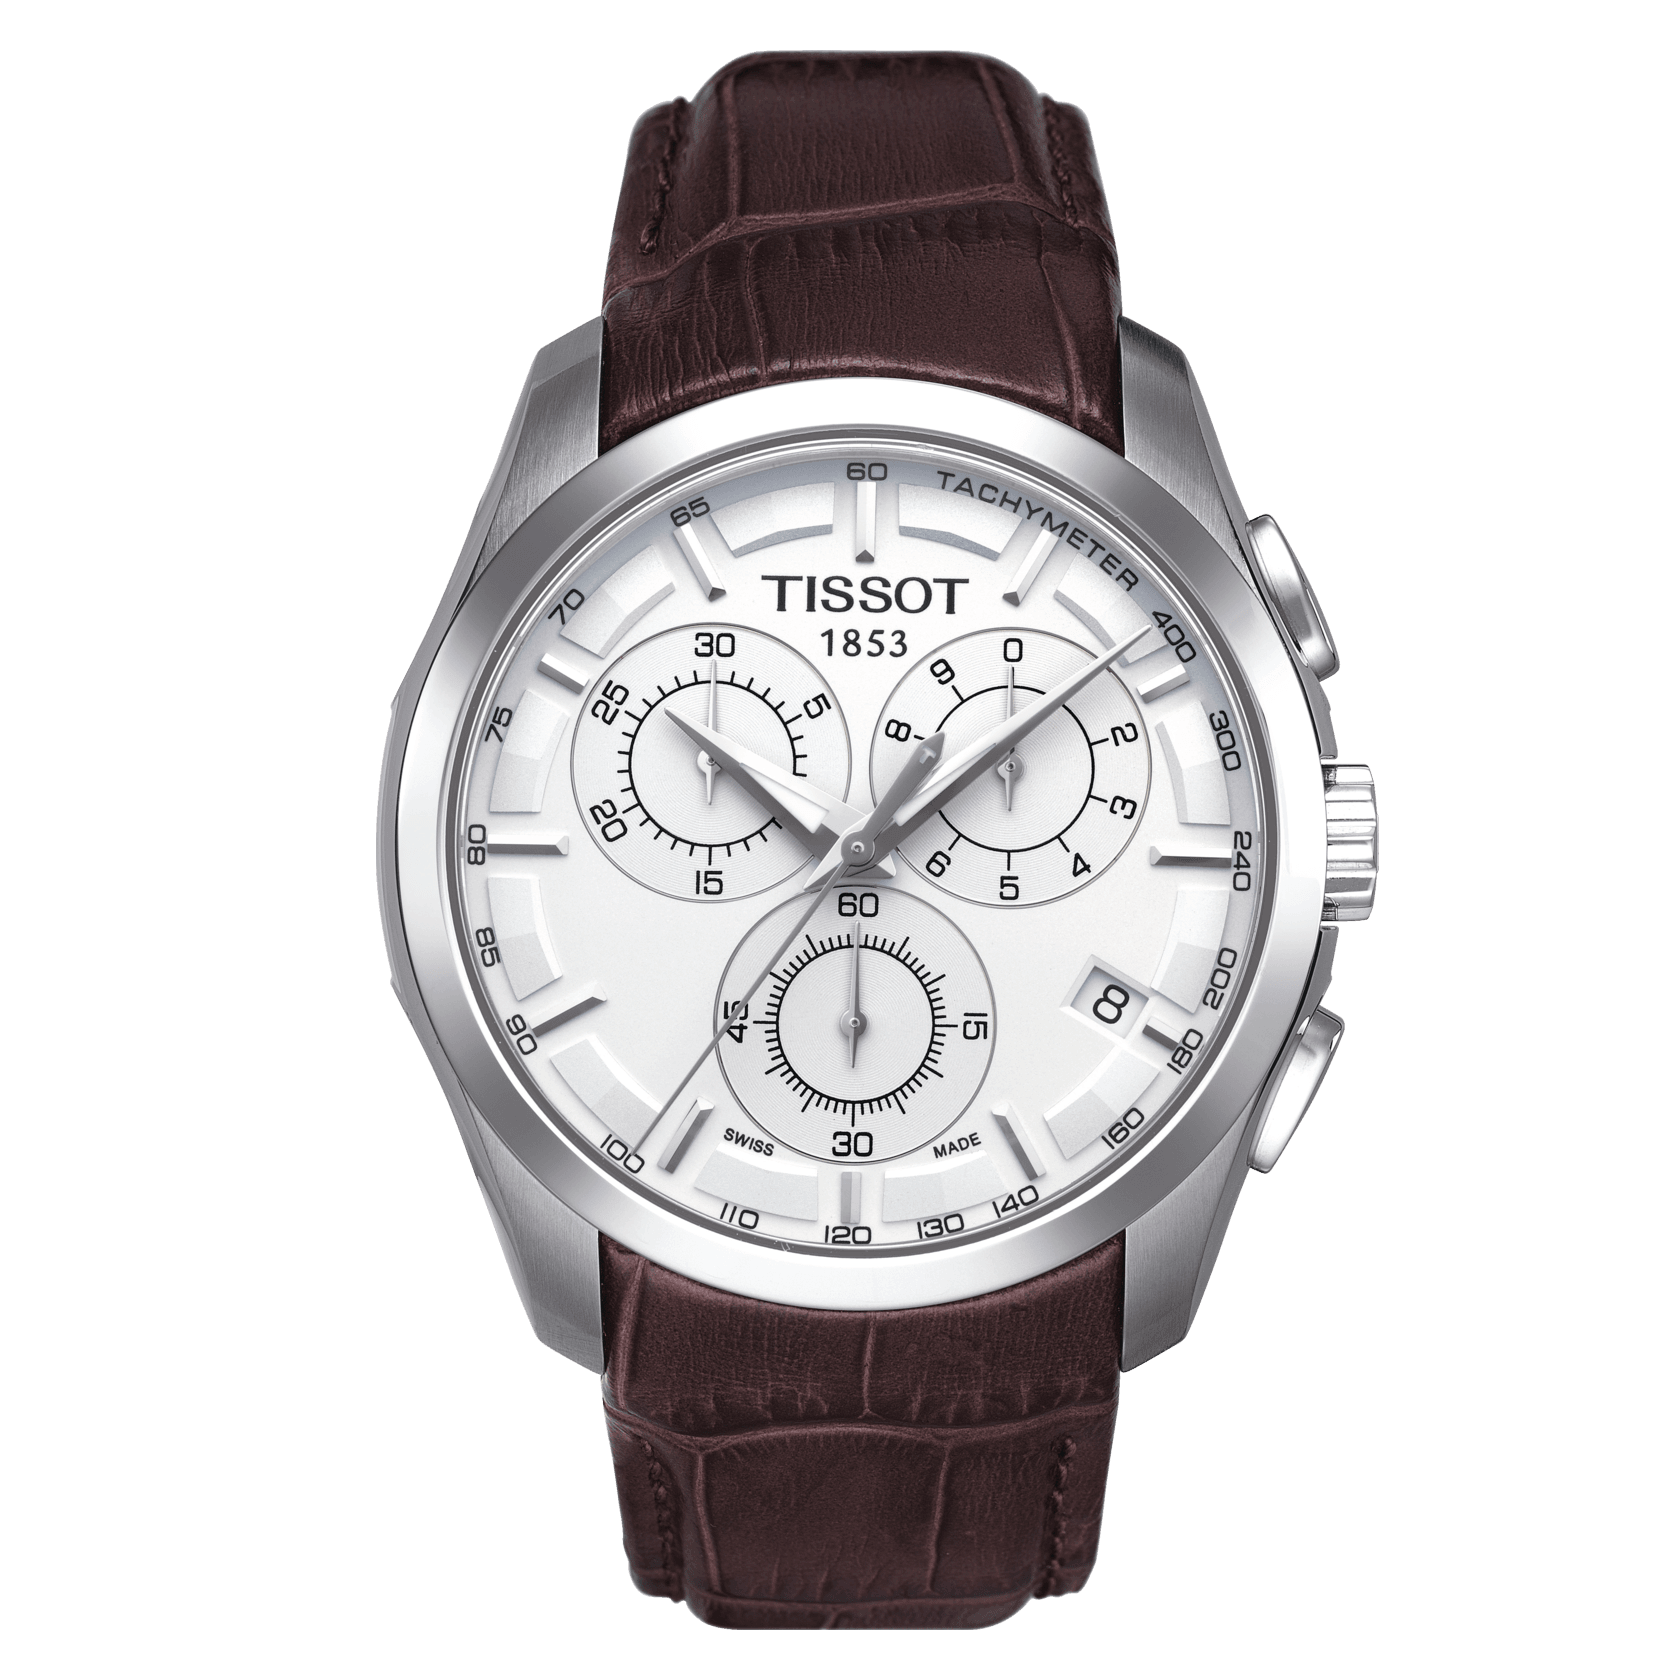 Tissot T-Classic Couturier Chronograph Silver Dial Men's Watch - Kamal Watch Company